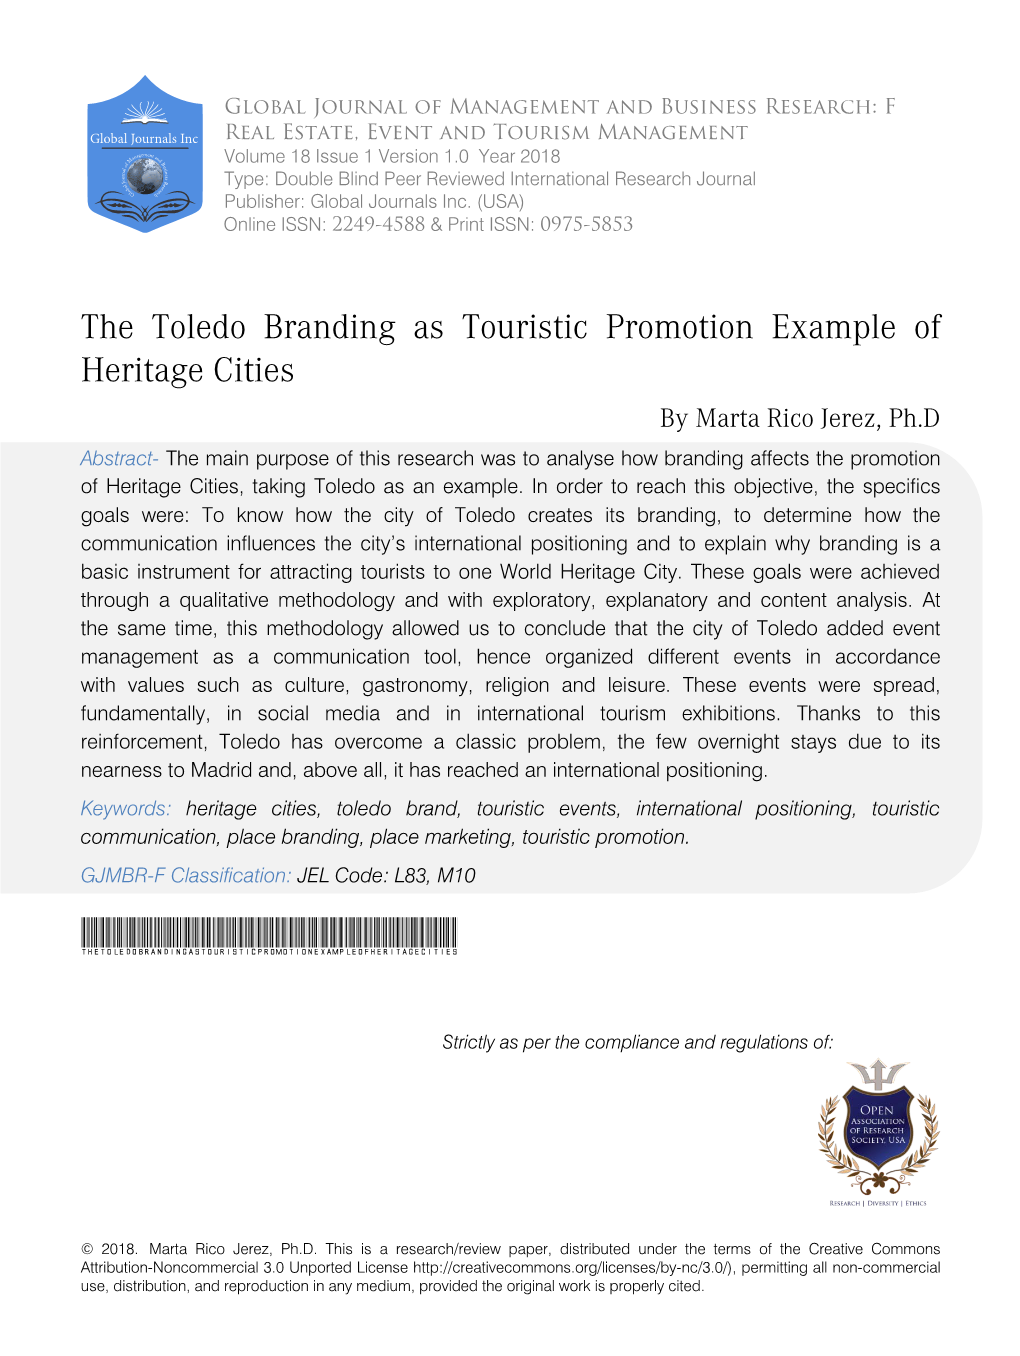 The Toledo Branding As Touristic Promotion Example of Heritage Cities by Marta Rico Jerez, Ph.D